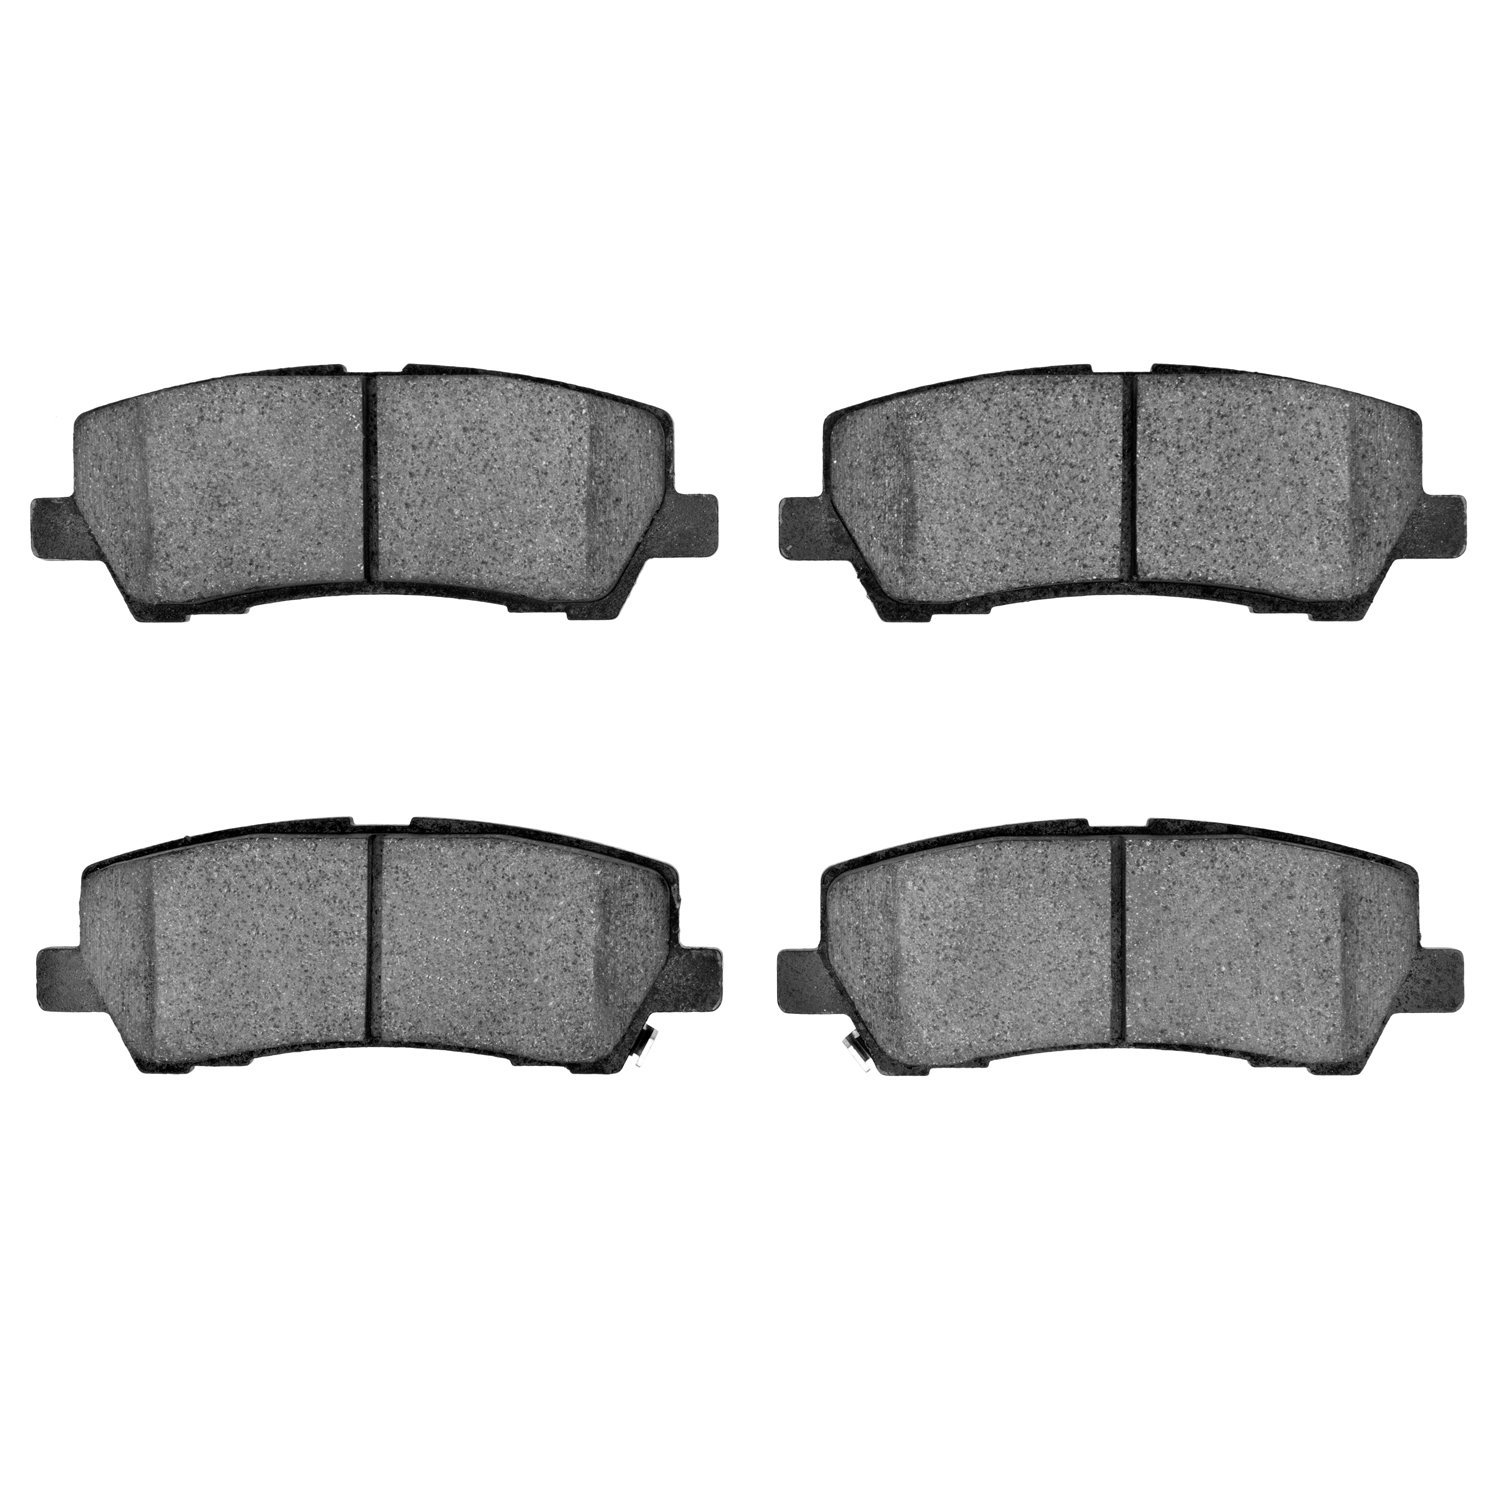 Track/Street Brake Pads, Fits Select Ford/Lincoln/Mercury/Mazda, Position: Rear